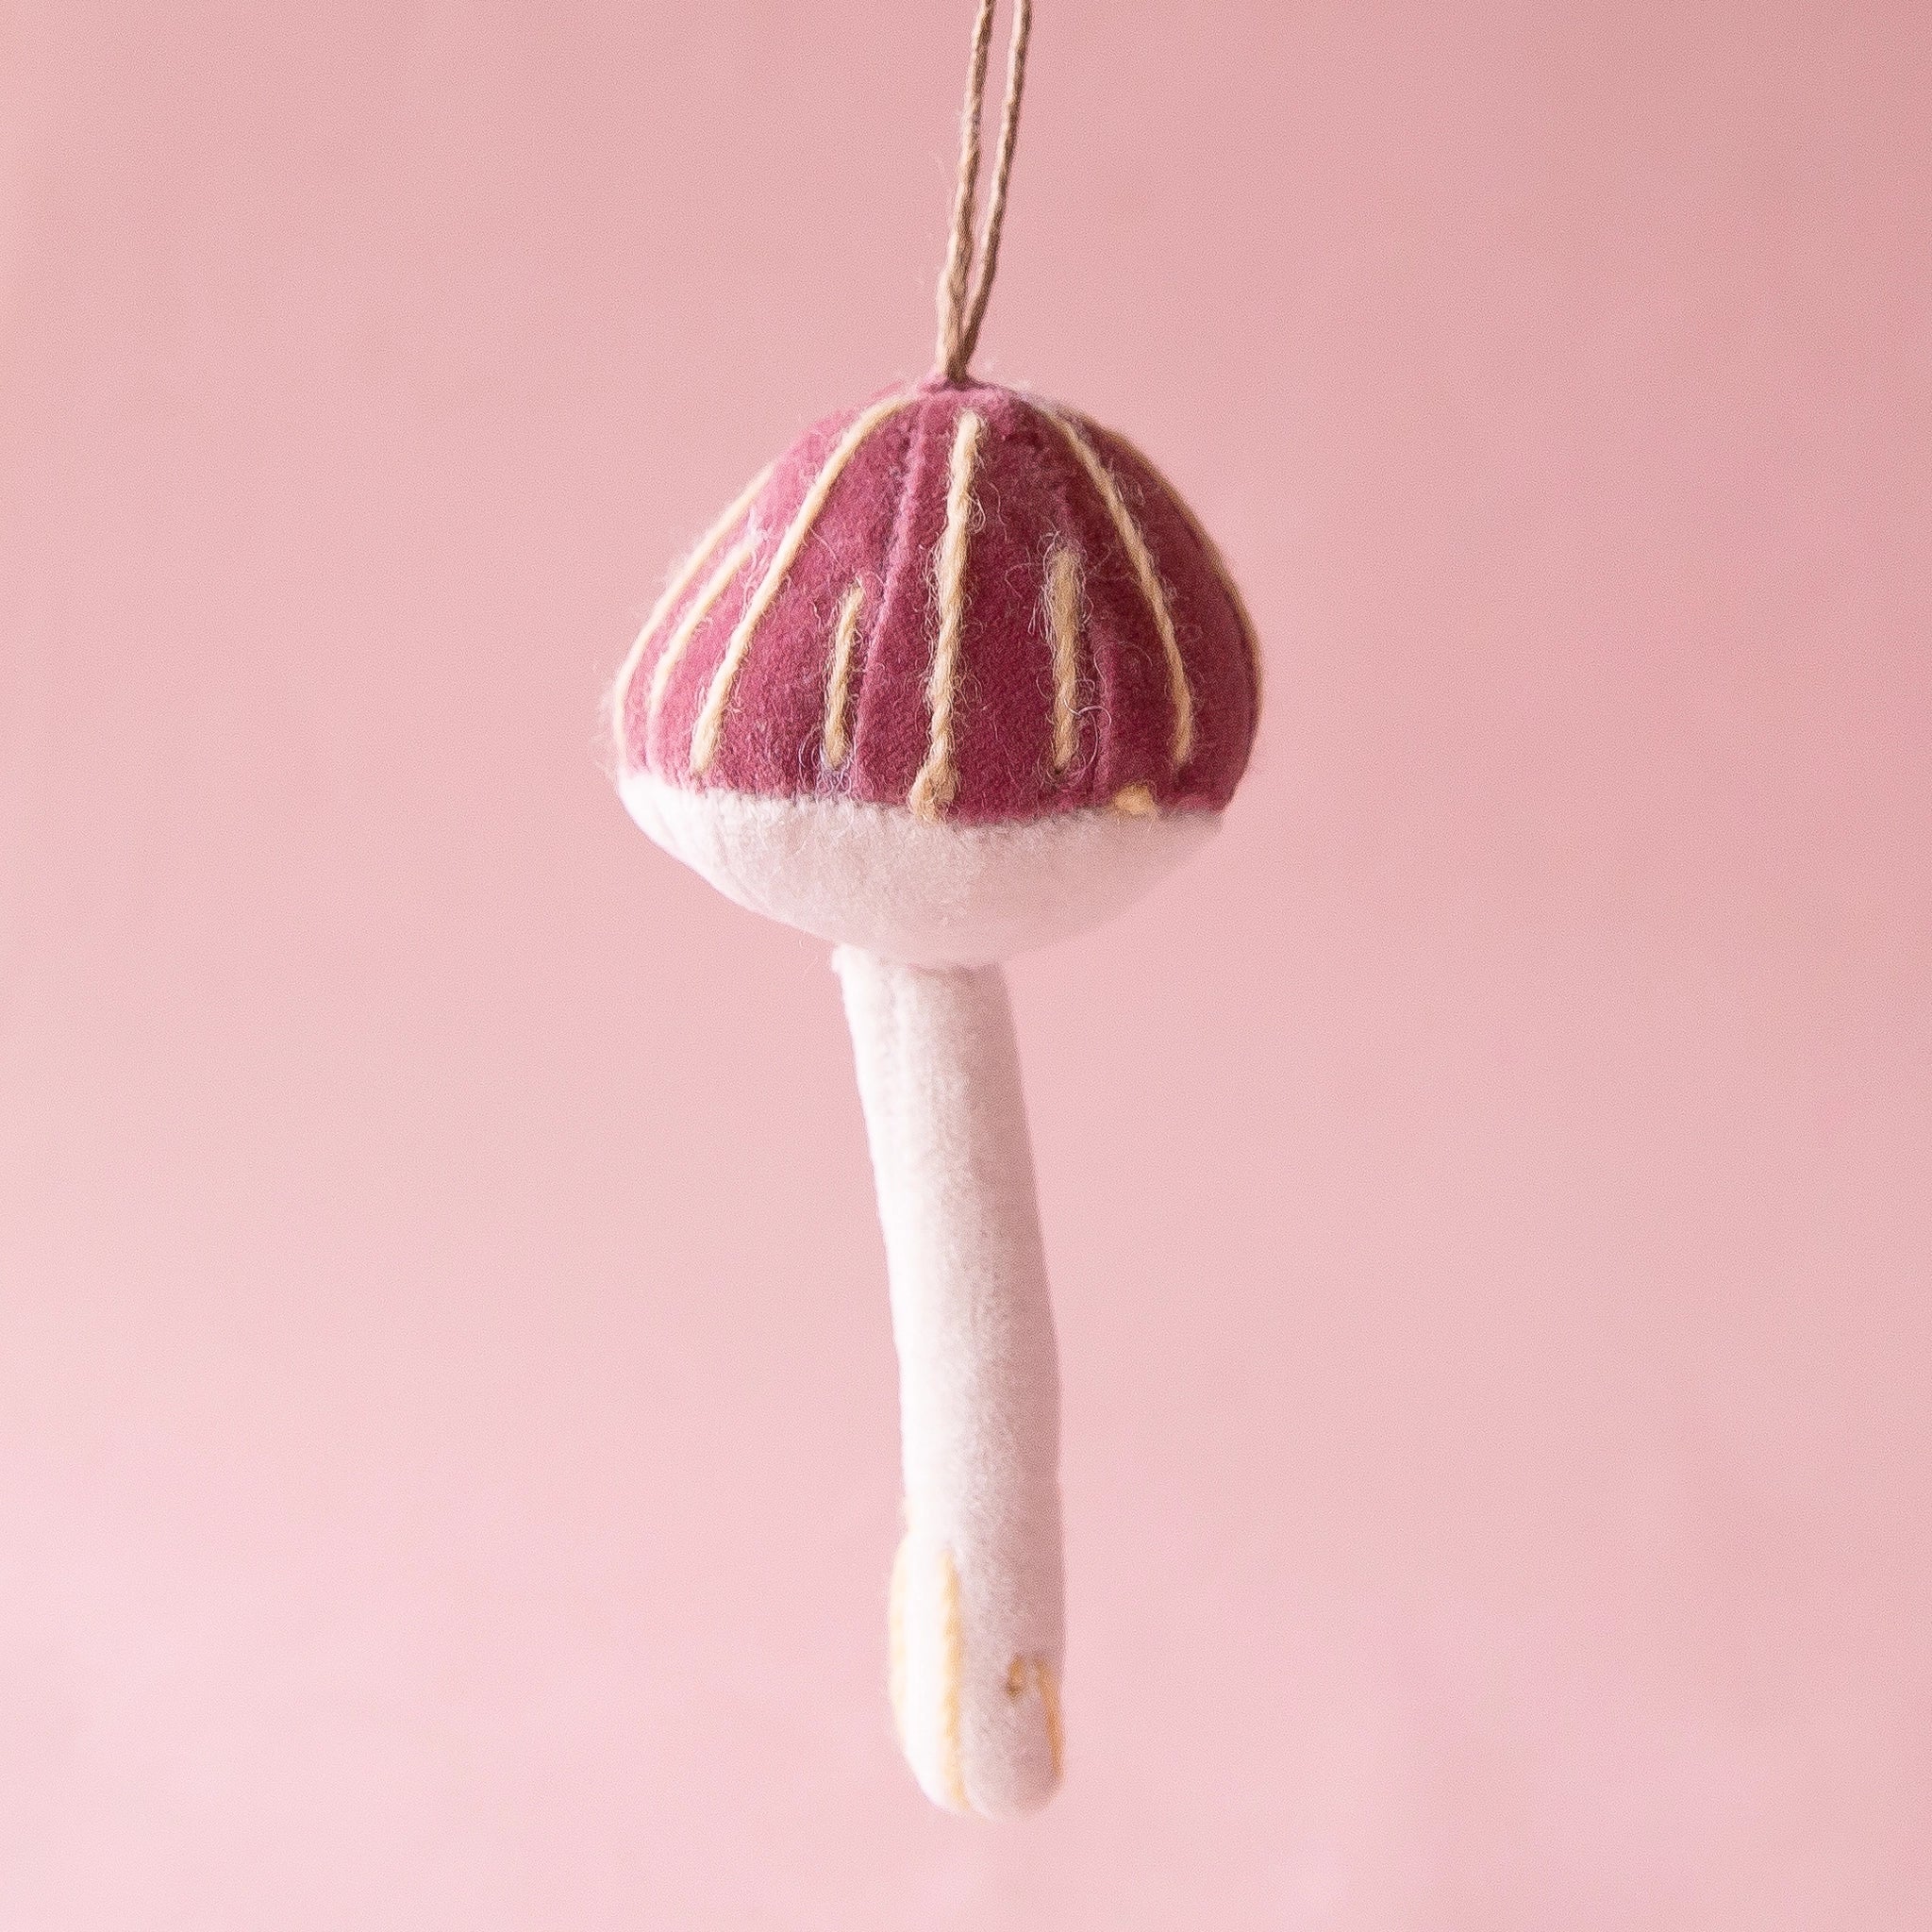 On a pink background is a maroon and white velvet mushroom ornament.